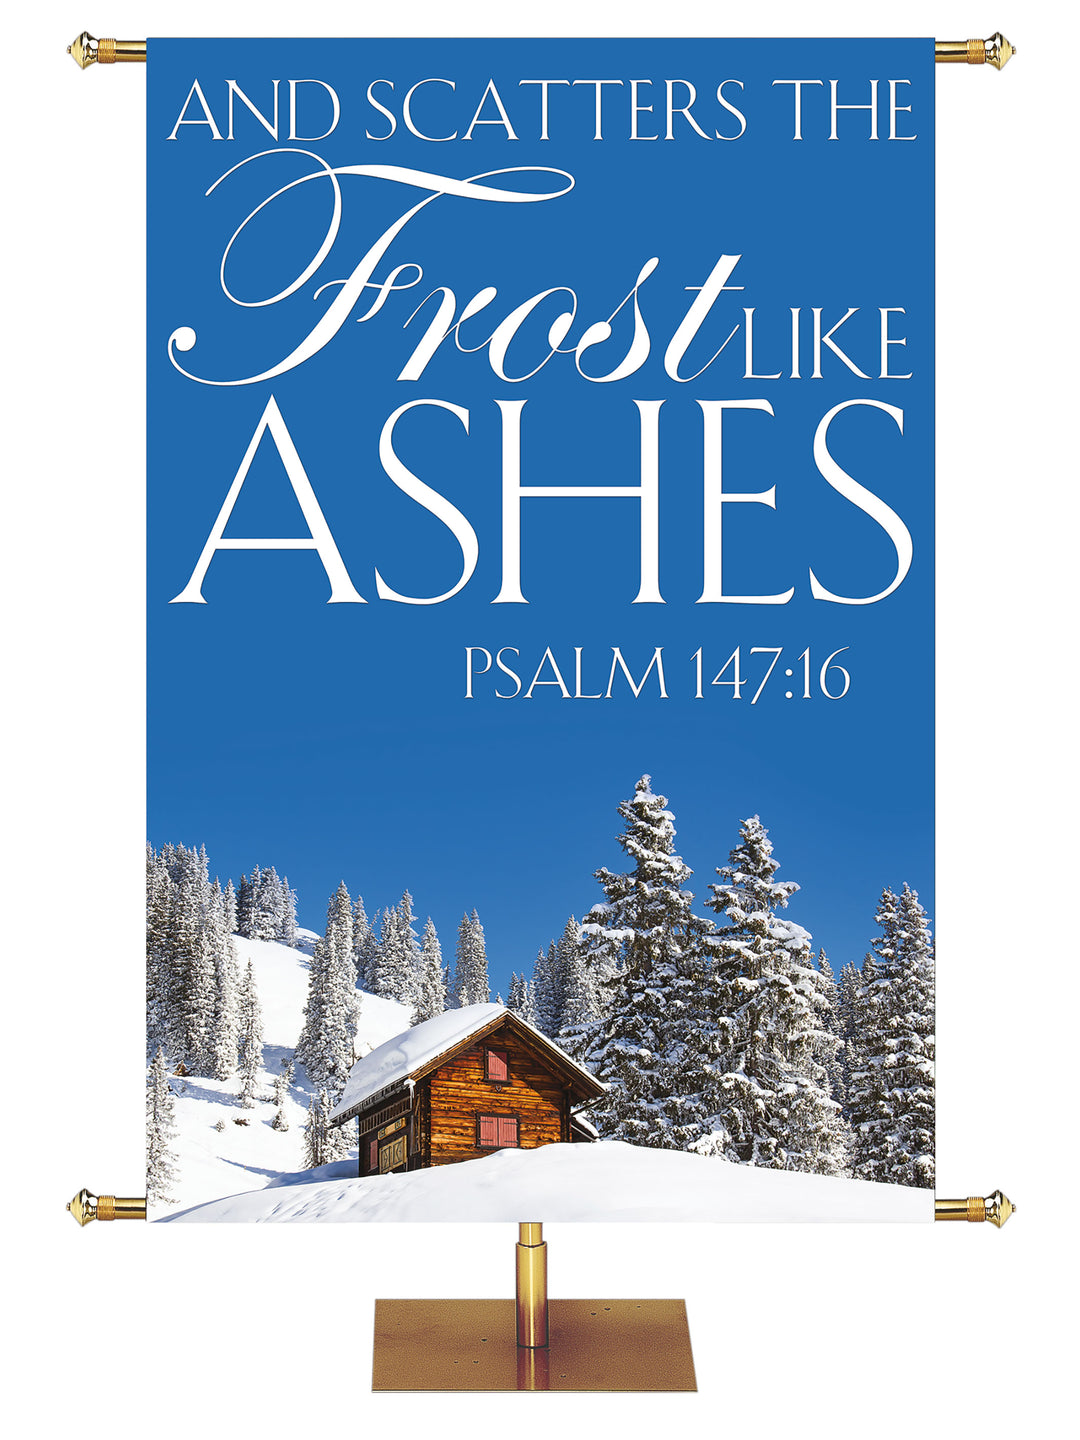 Portraits of Sacred Winter Frost like Ashes H - Christmas Banners - PraiseBanners